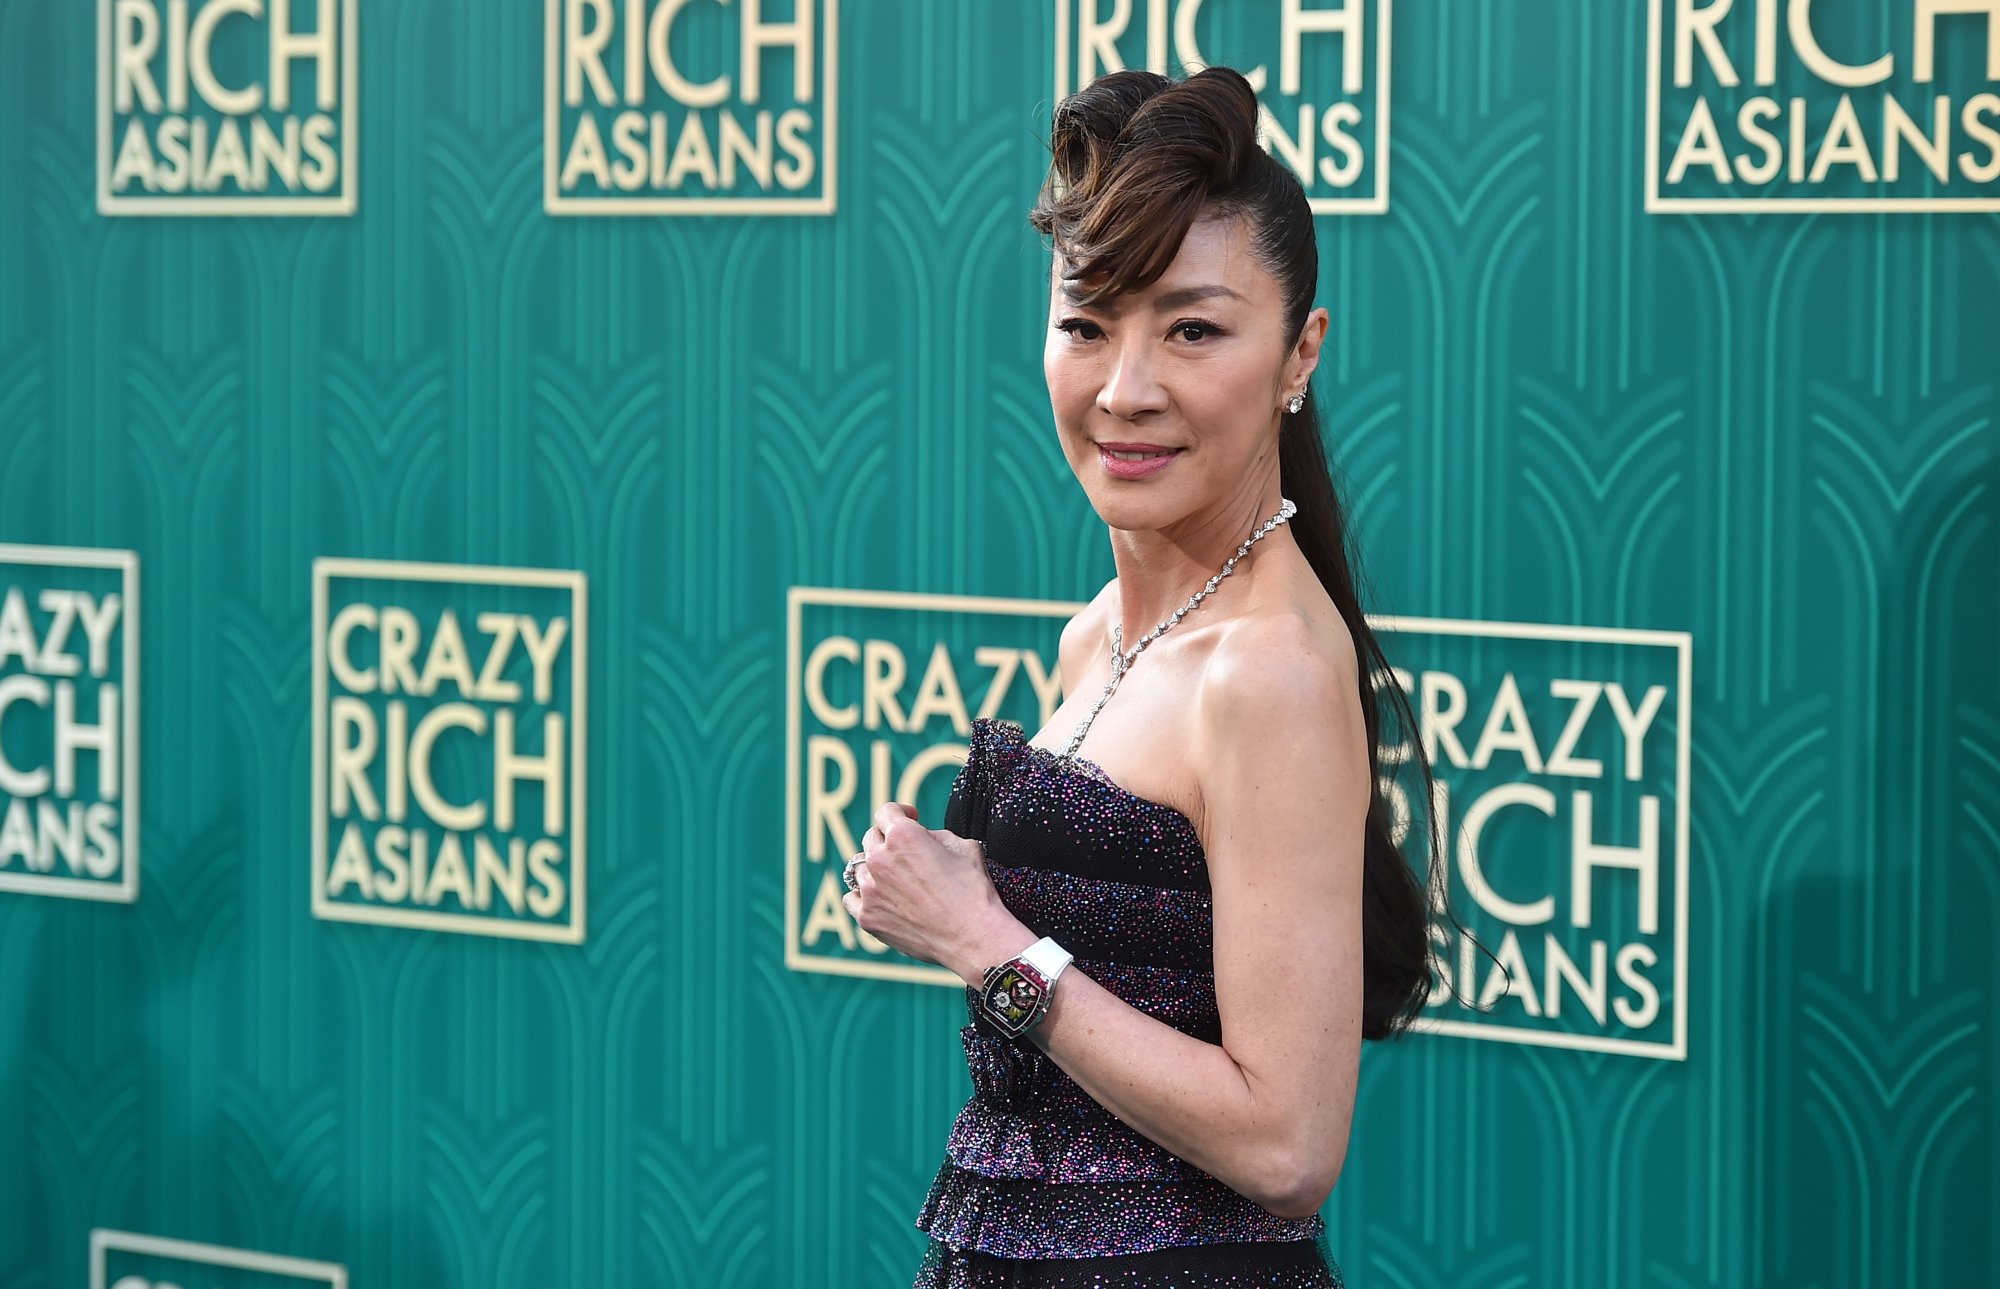 'Crazy Rich Asians' star Michelle Yeoh wearing a watch and a glittered dress in front of a green step and repeat for the movie